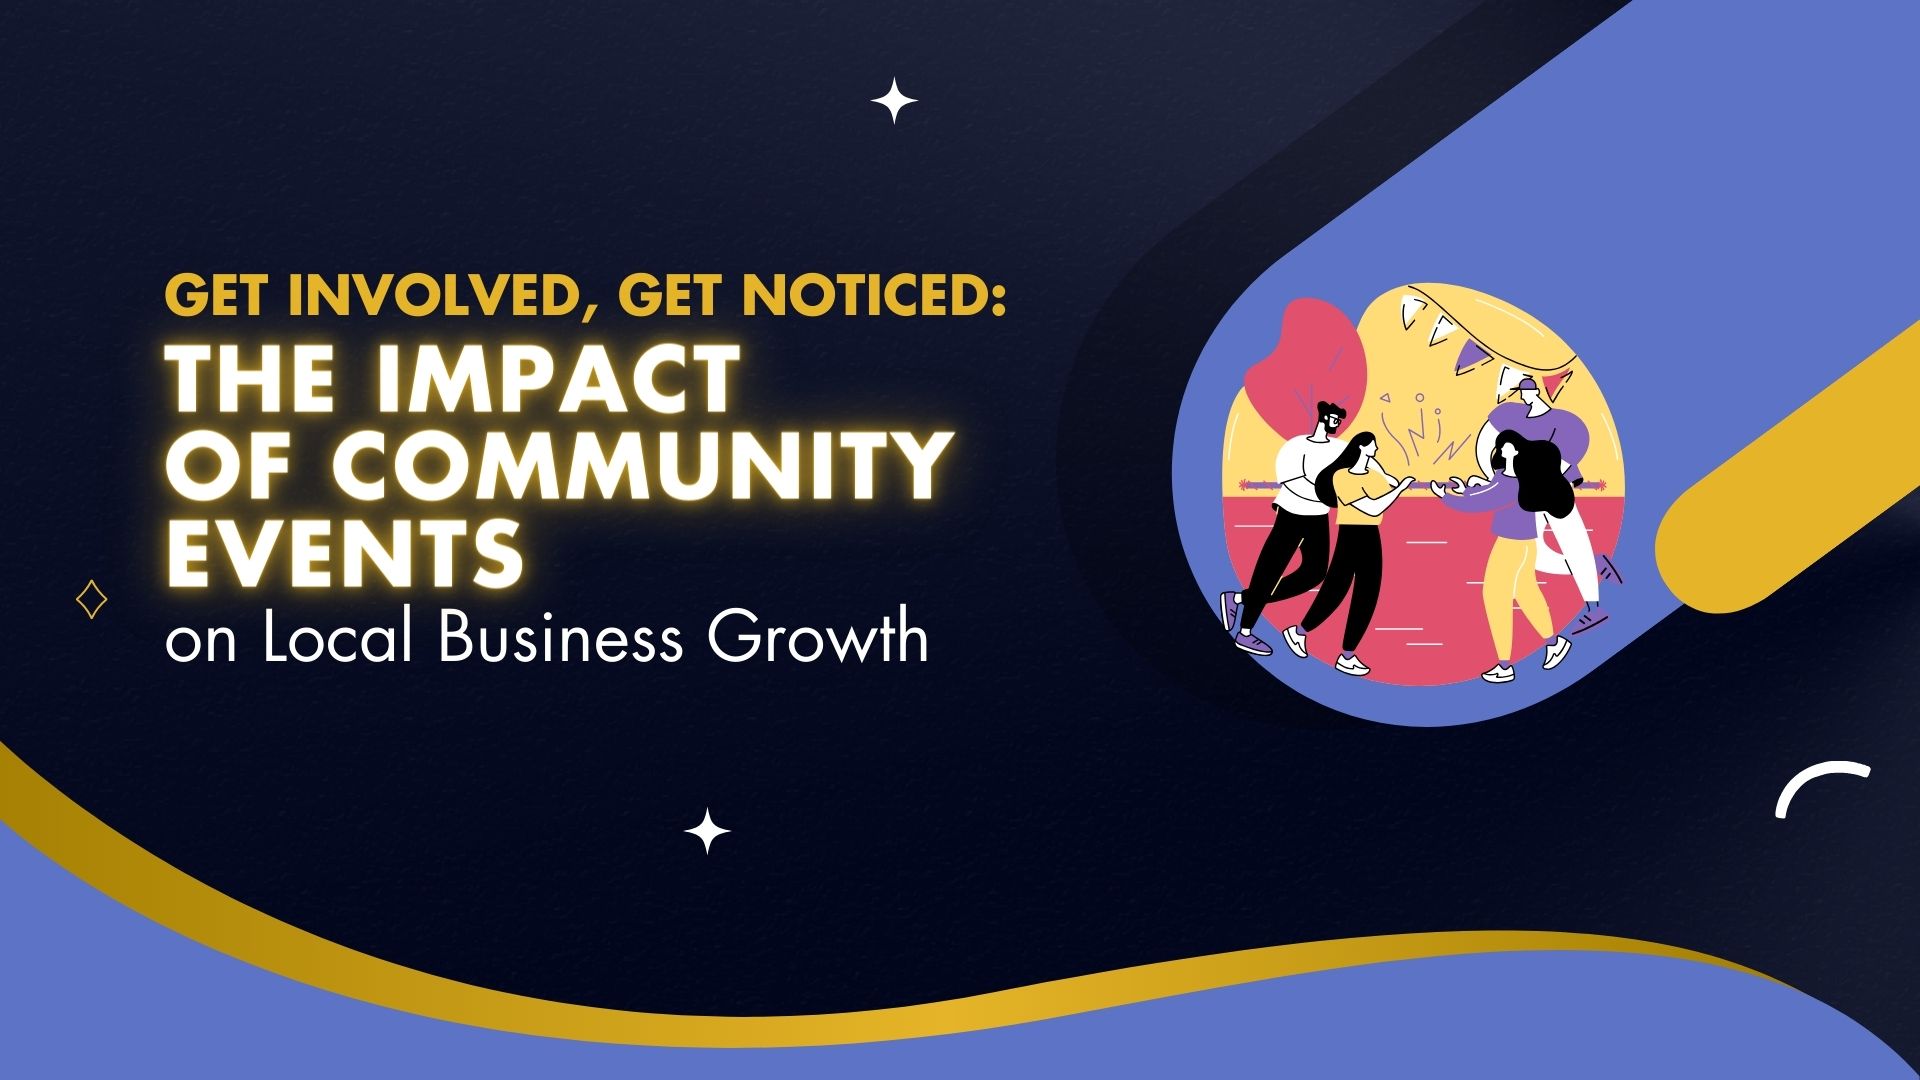 The Impact of Community Events on Local Business Growth